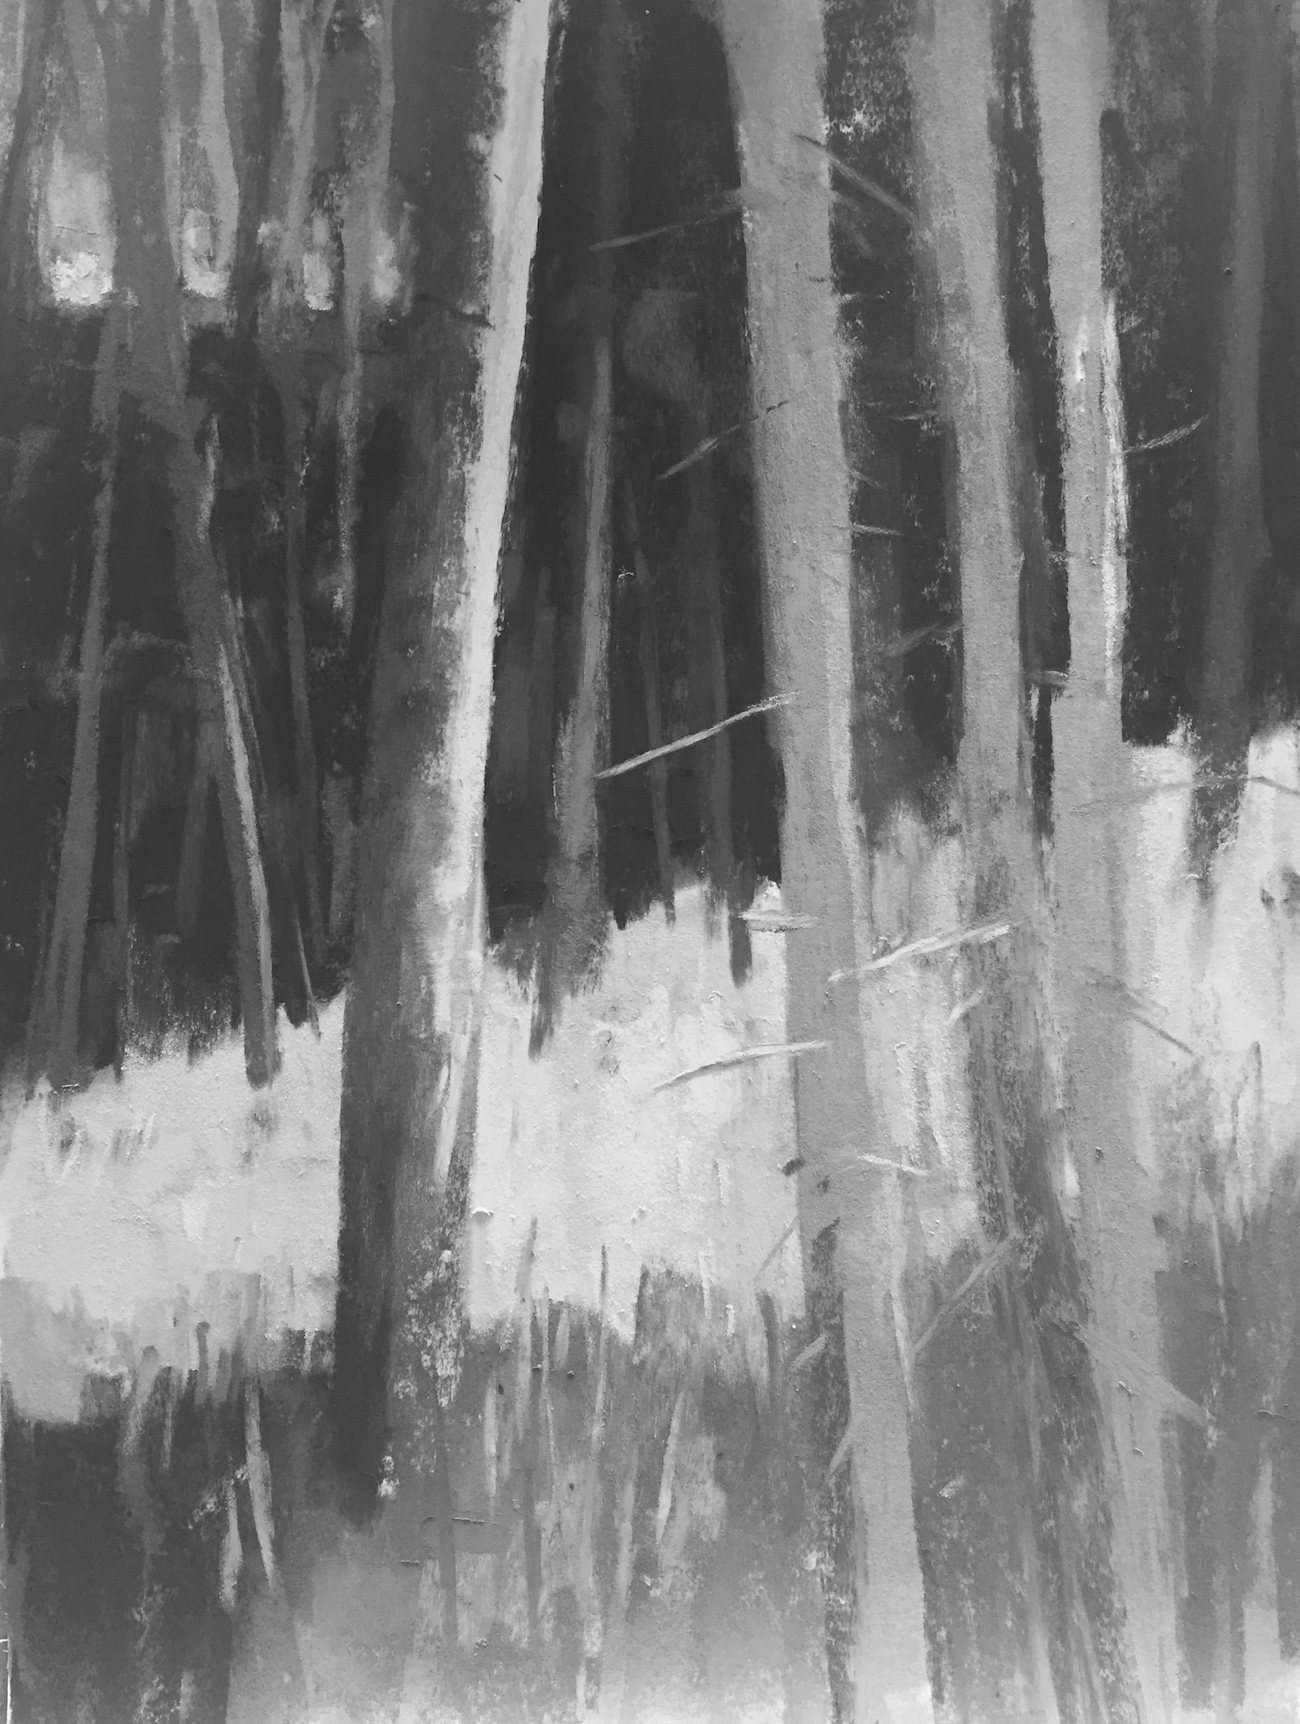 Painting summer greens in soft pastels: And how it looks in black and white